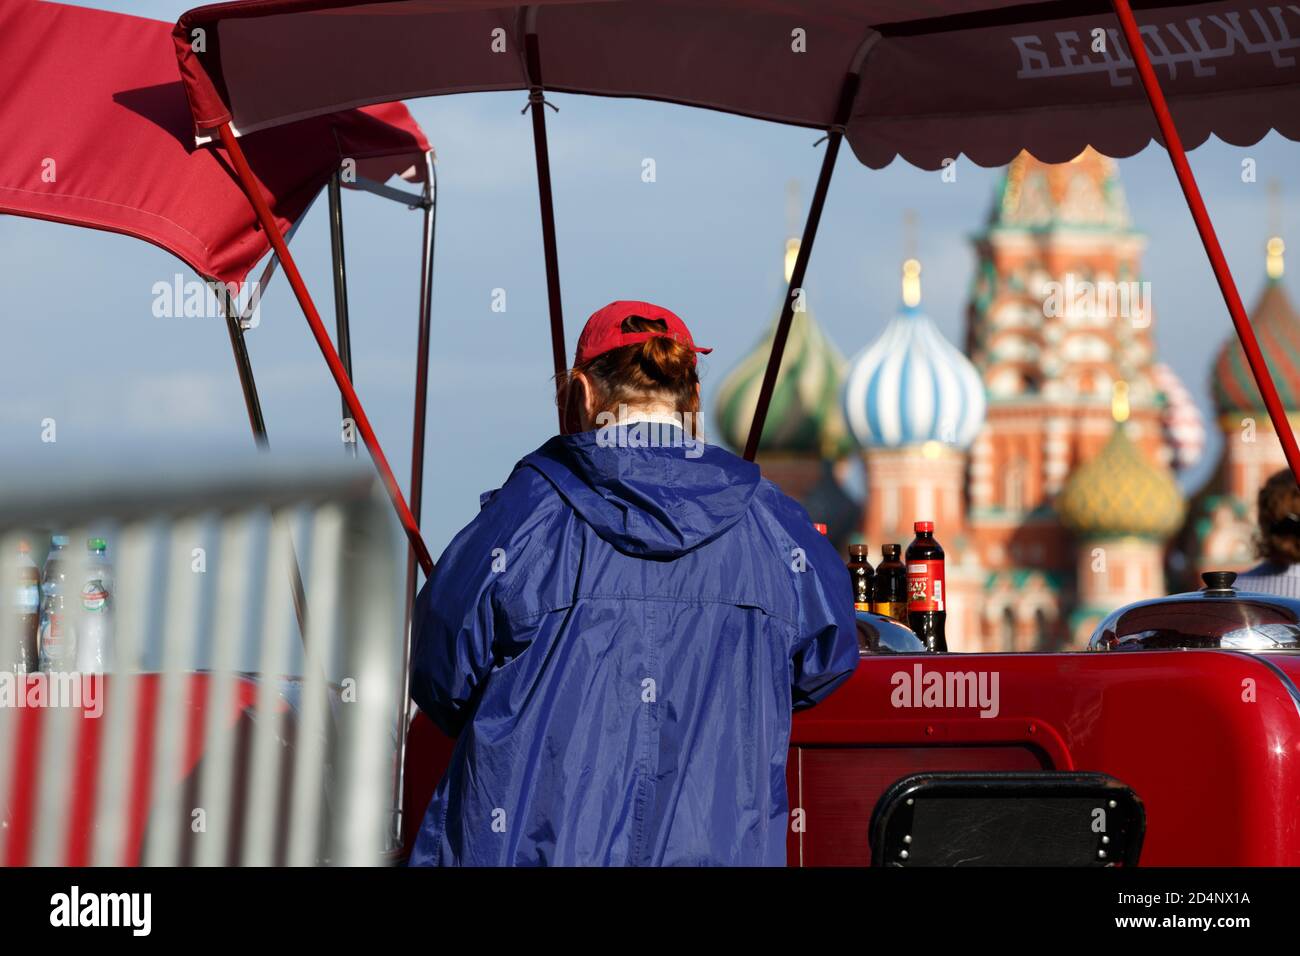 Moscow,Russia, July 21,2020: Ice cream seller in blue clothes in mobile red kiosk selling ice cream on red square with a view of St. Basil's Cathedral Stock Photo